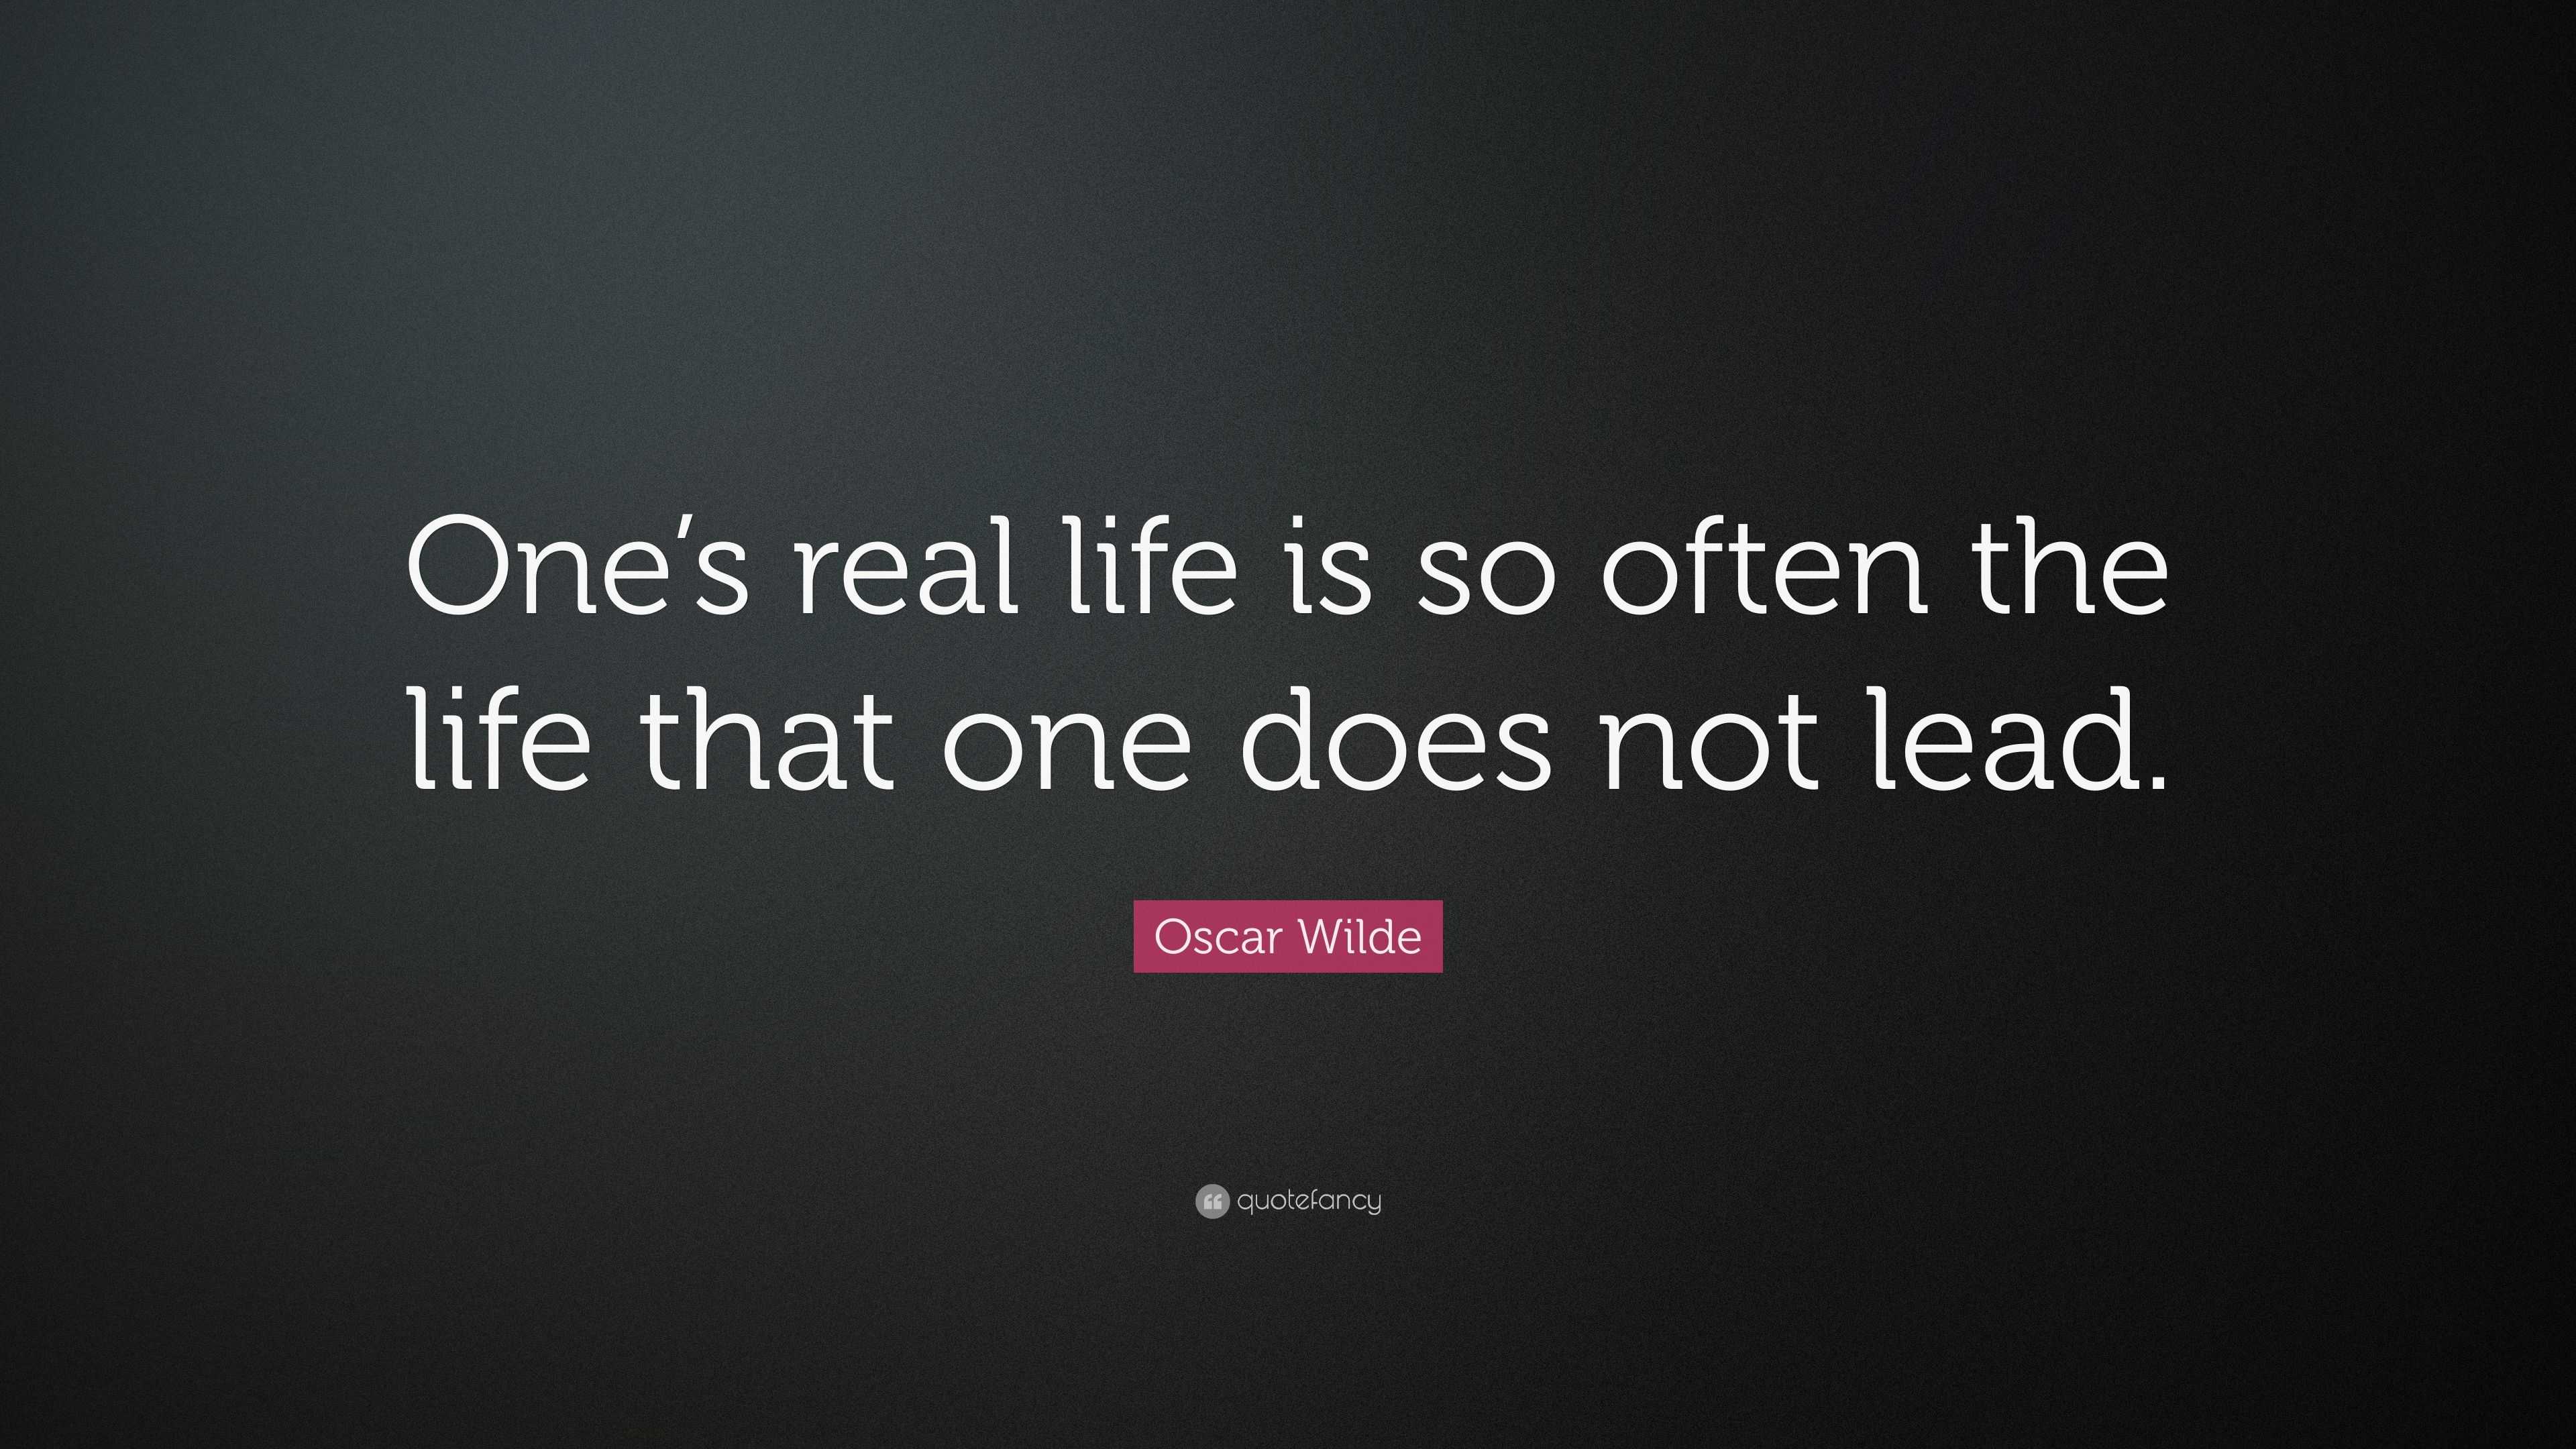 Real Life Quotes Oscar Wilde Quote “ e s Real Life Is So ten The Life That